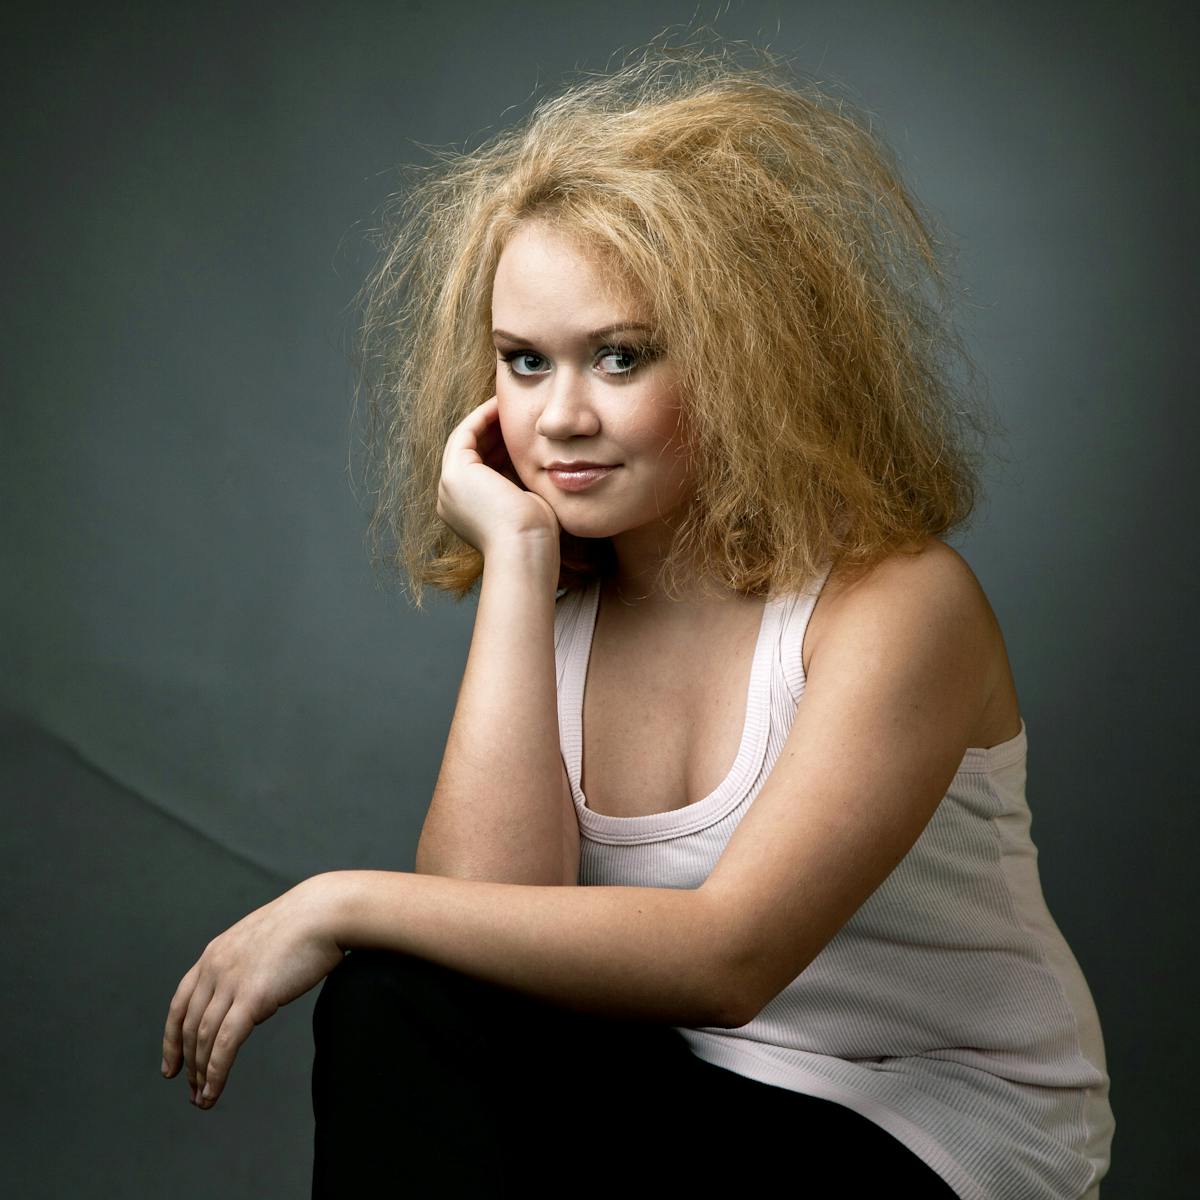 Uncombable hair syndrome: new study finds the genes responsible